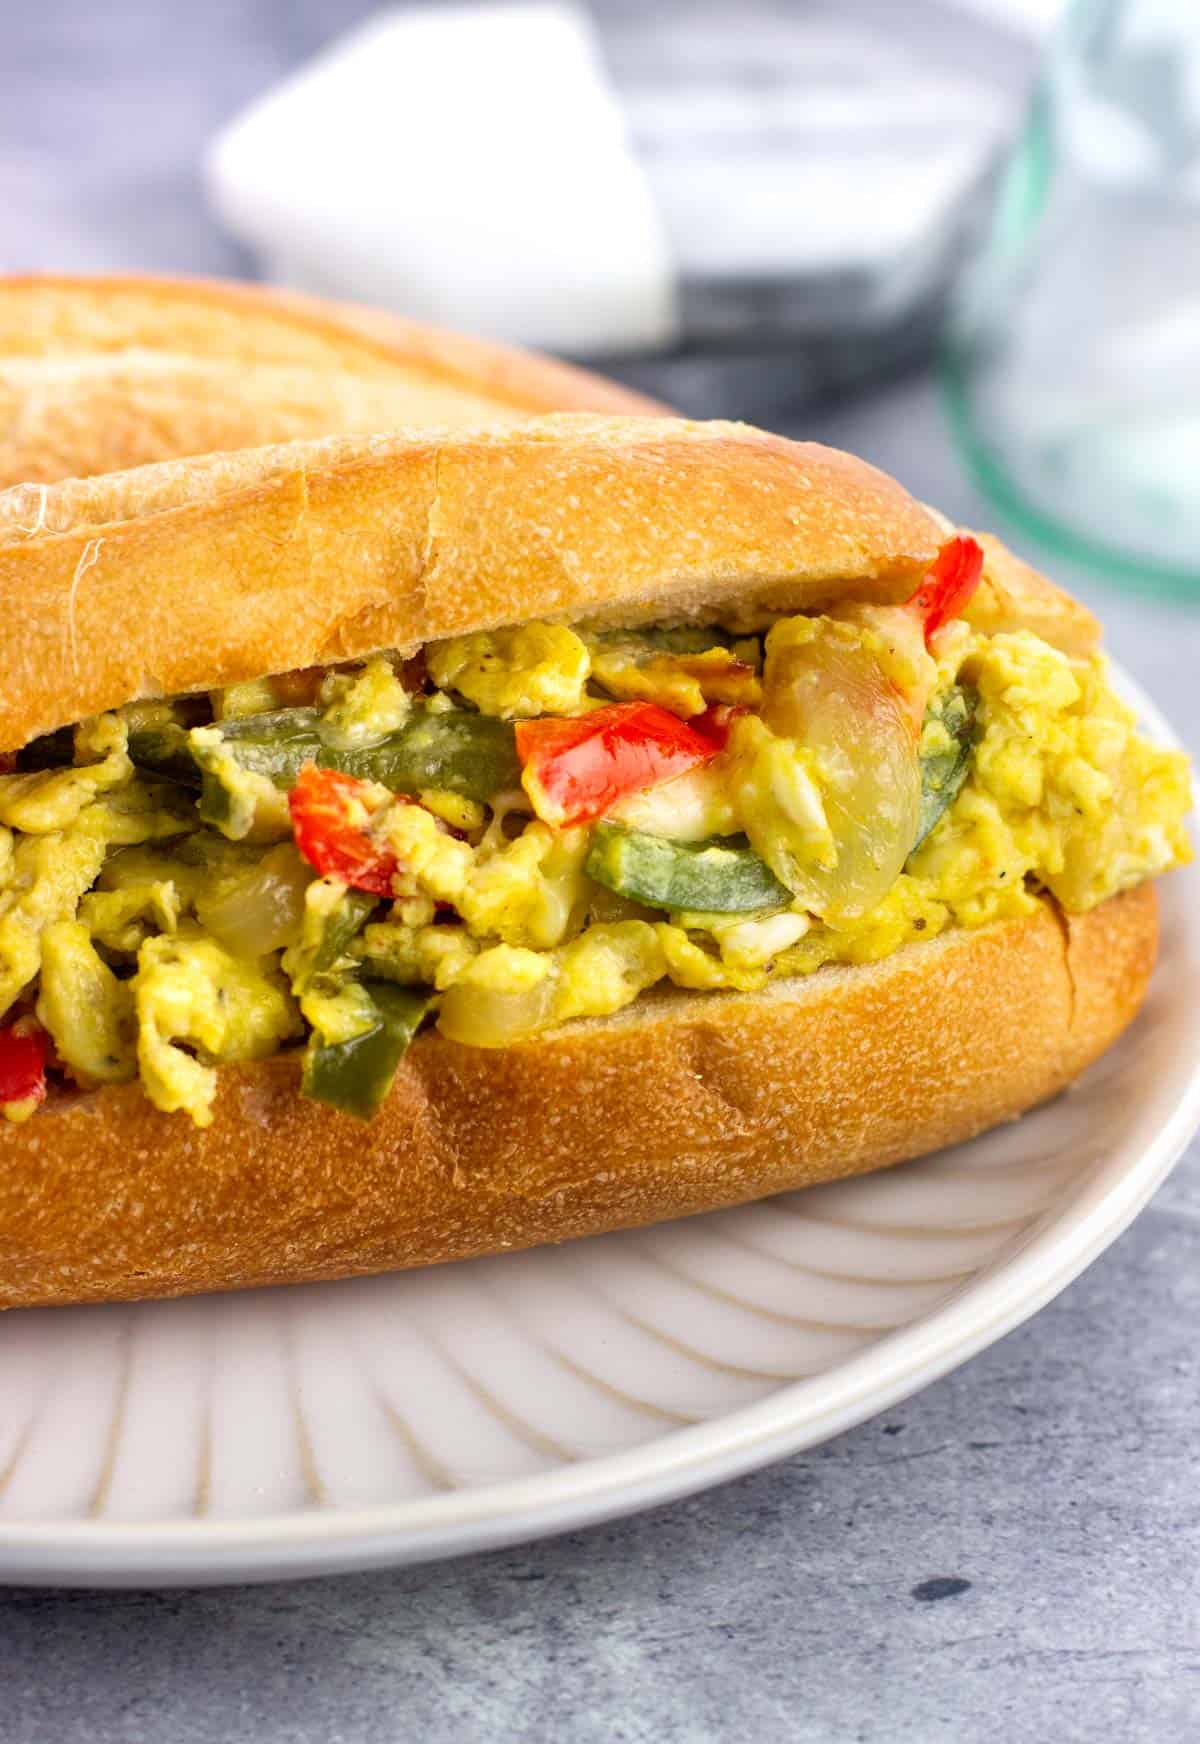 Scrambled eggs and peppers and onions on a roll.